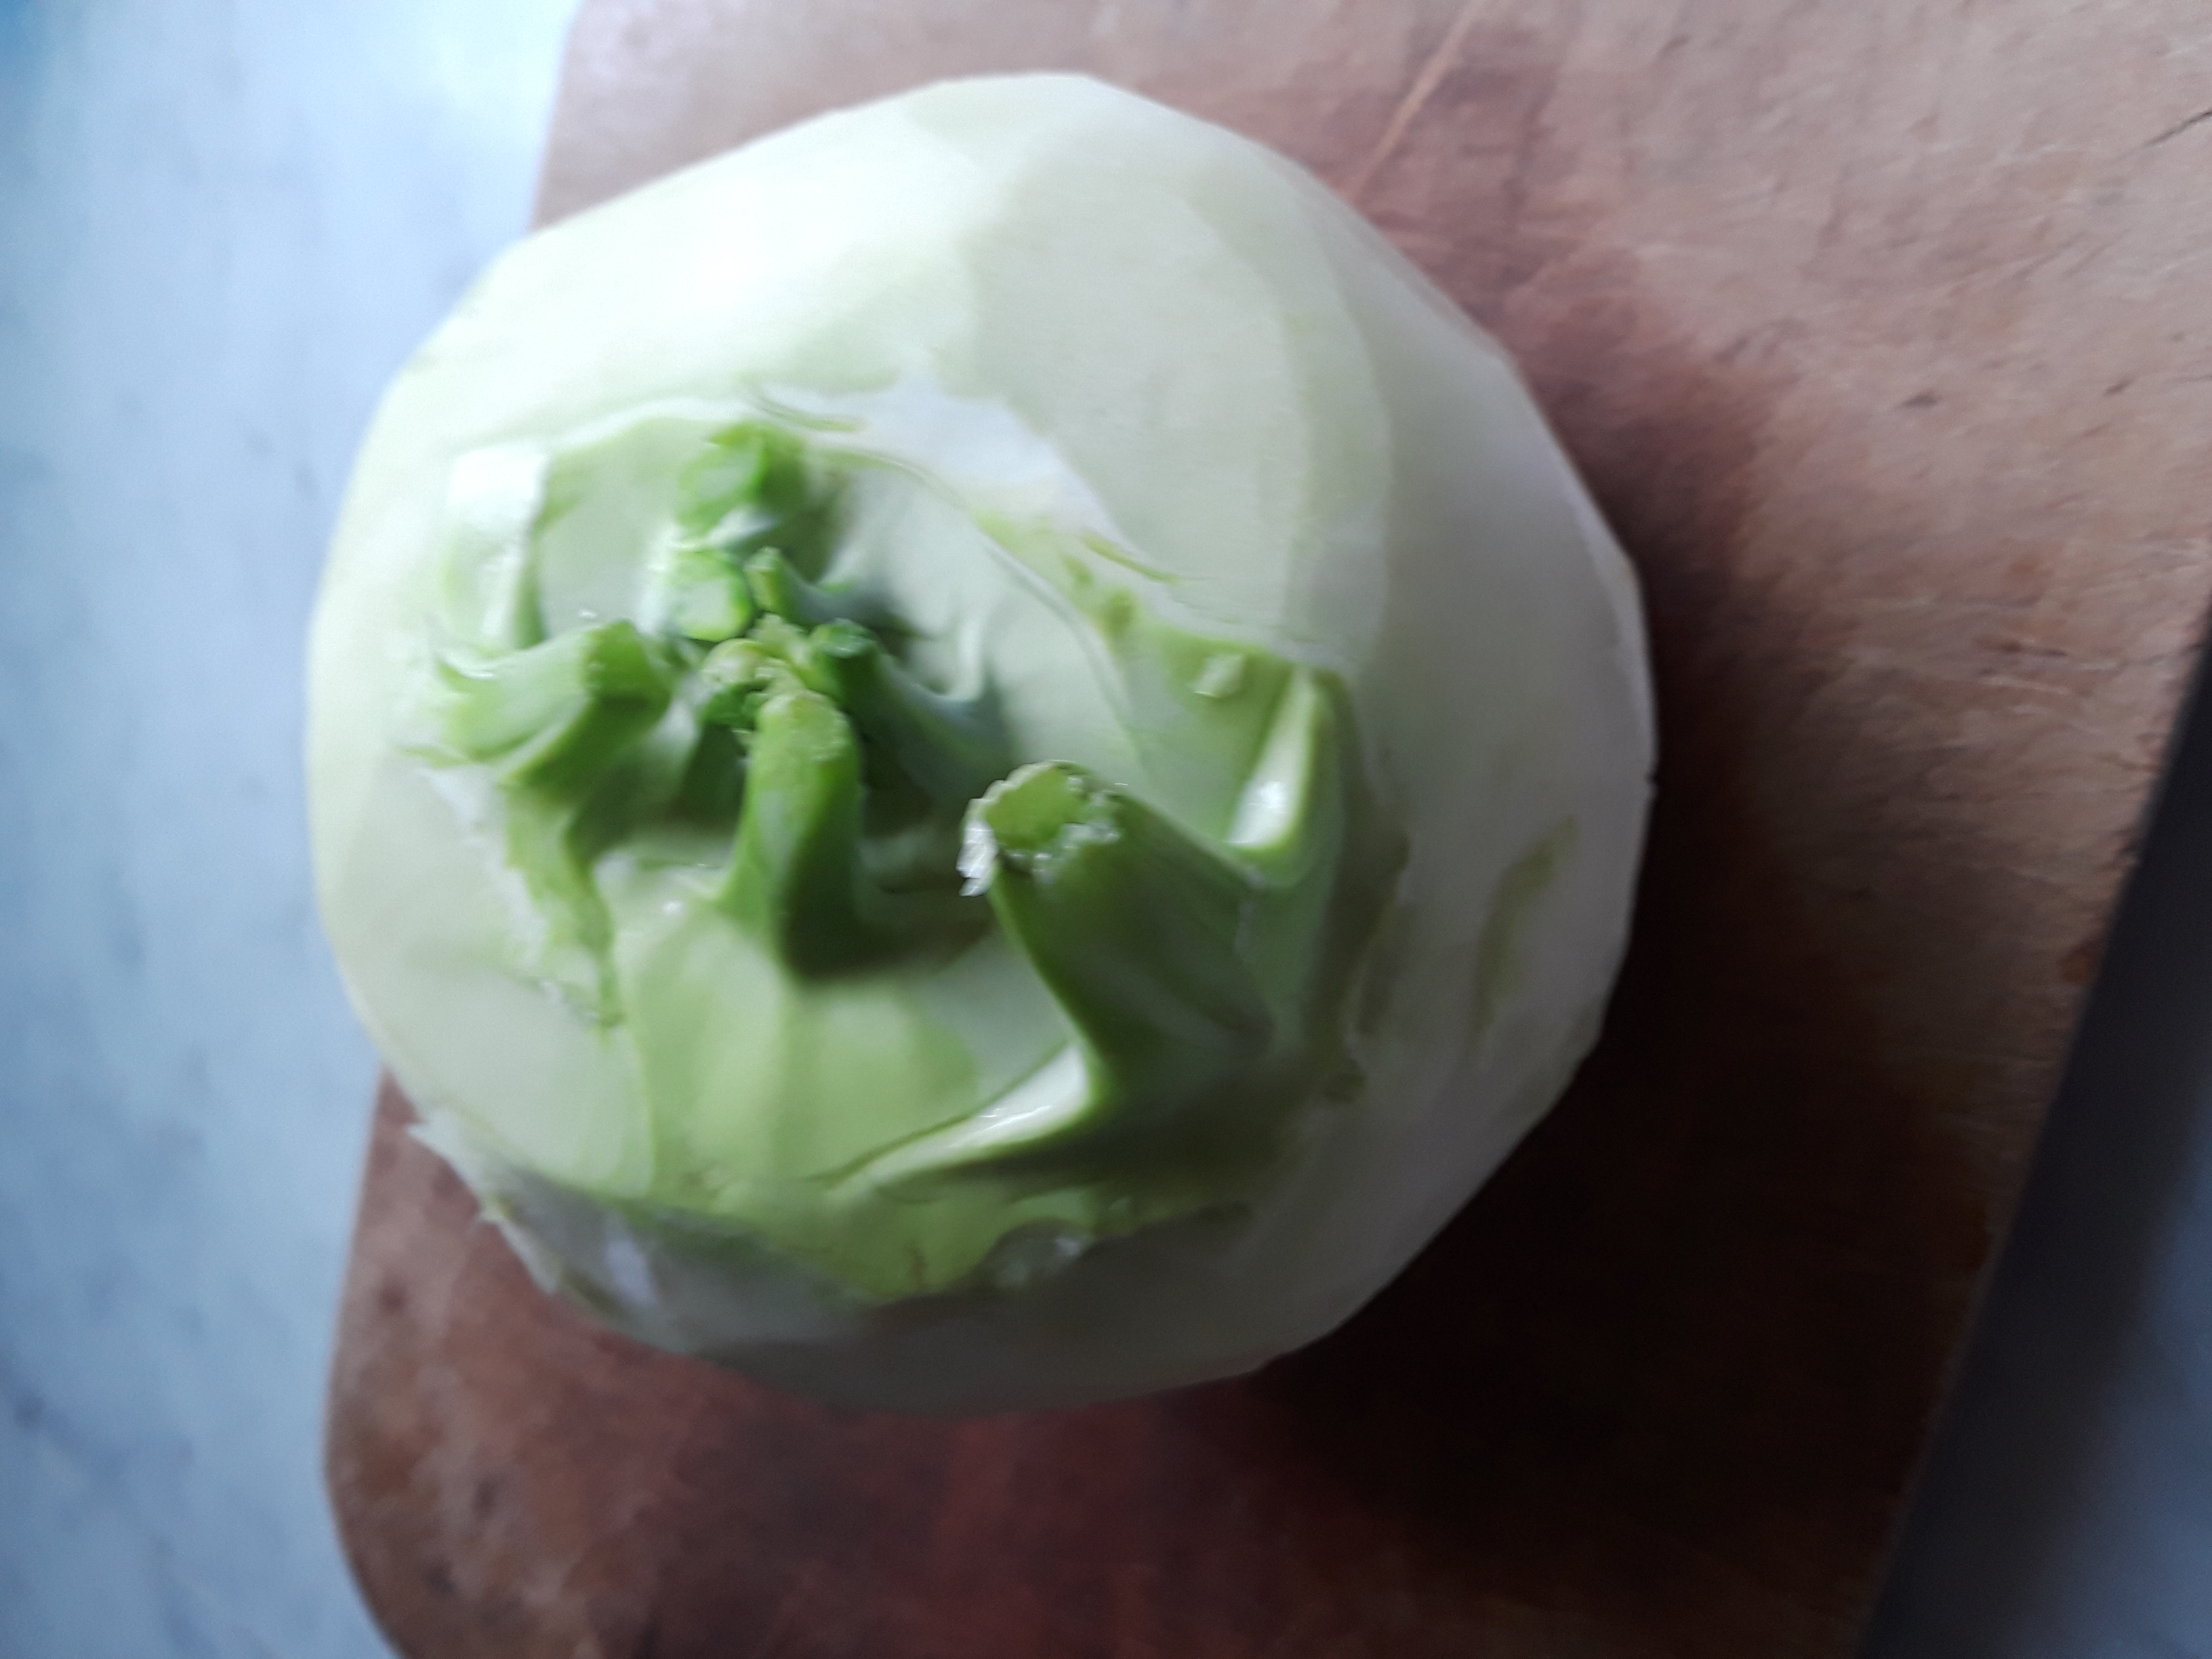 A kohlrabi bulb resembles a turnip, but is not in the same family